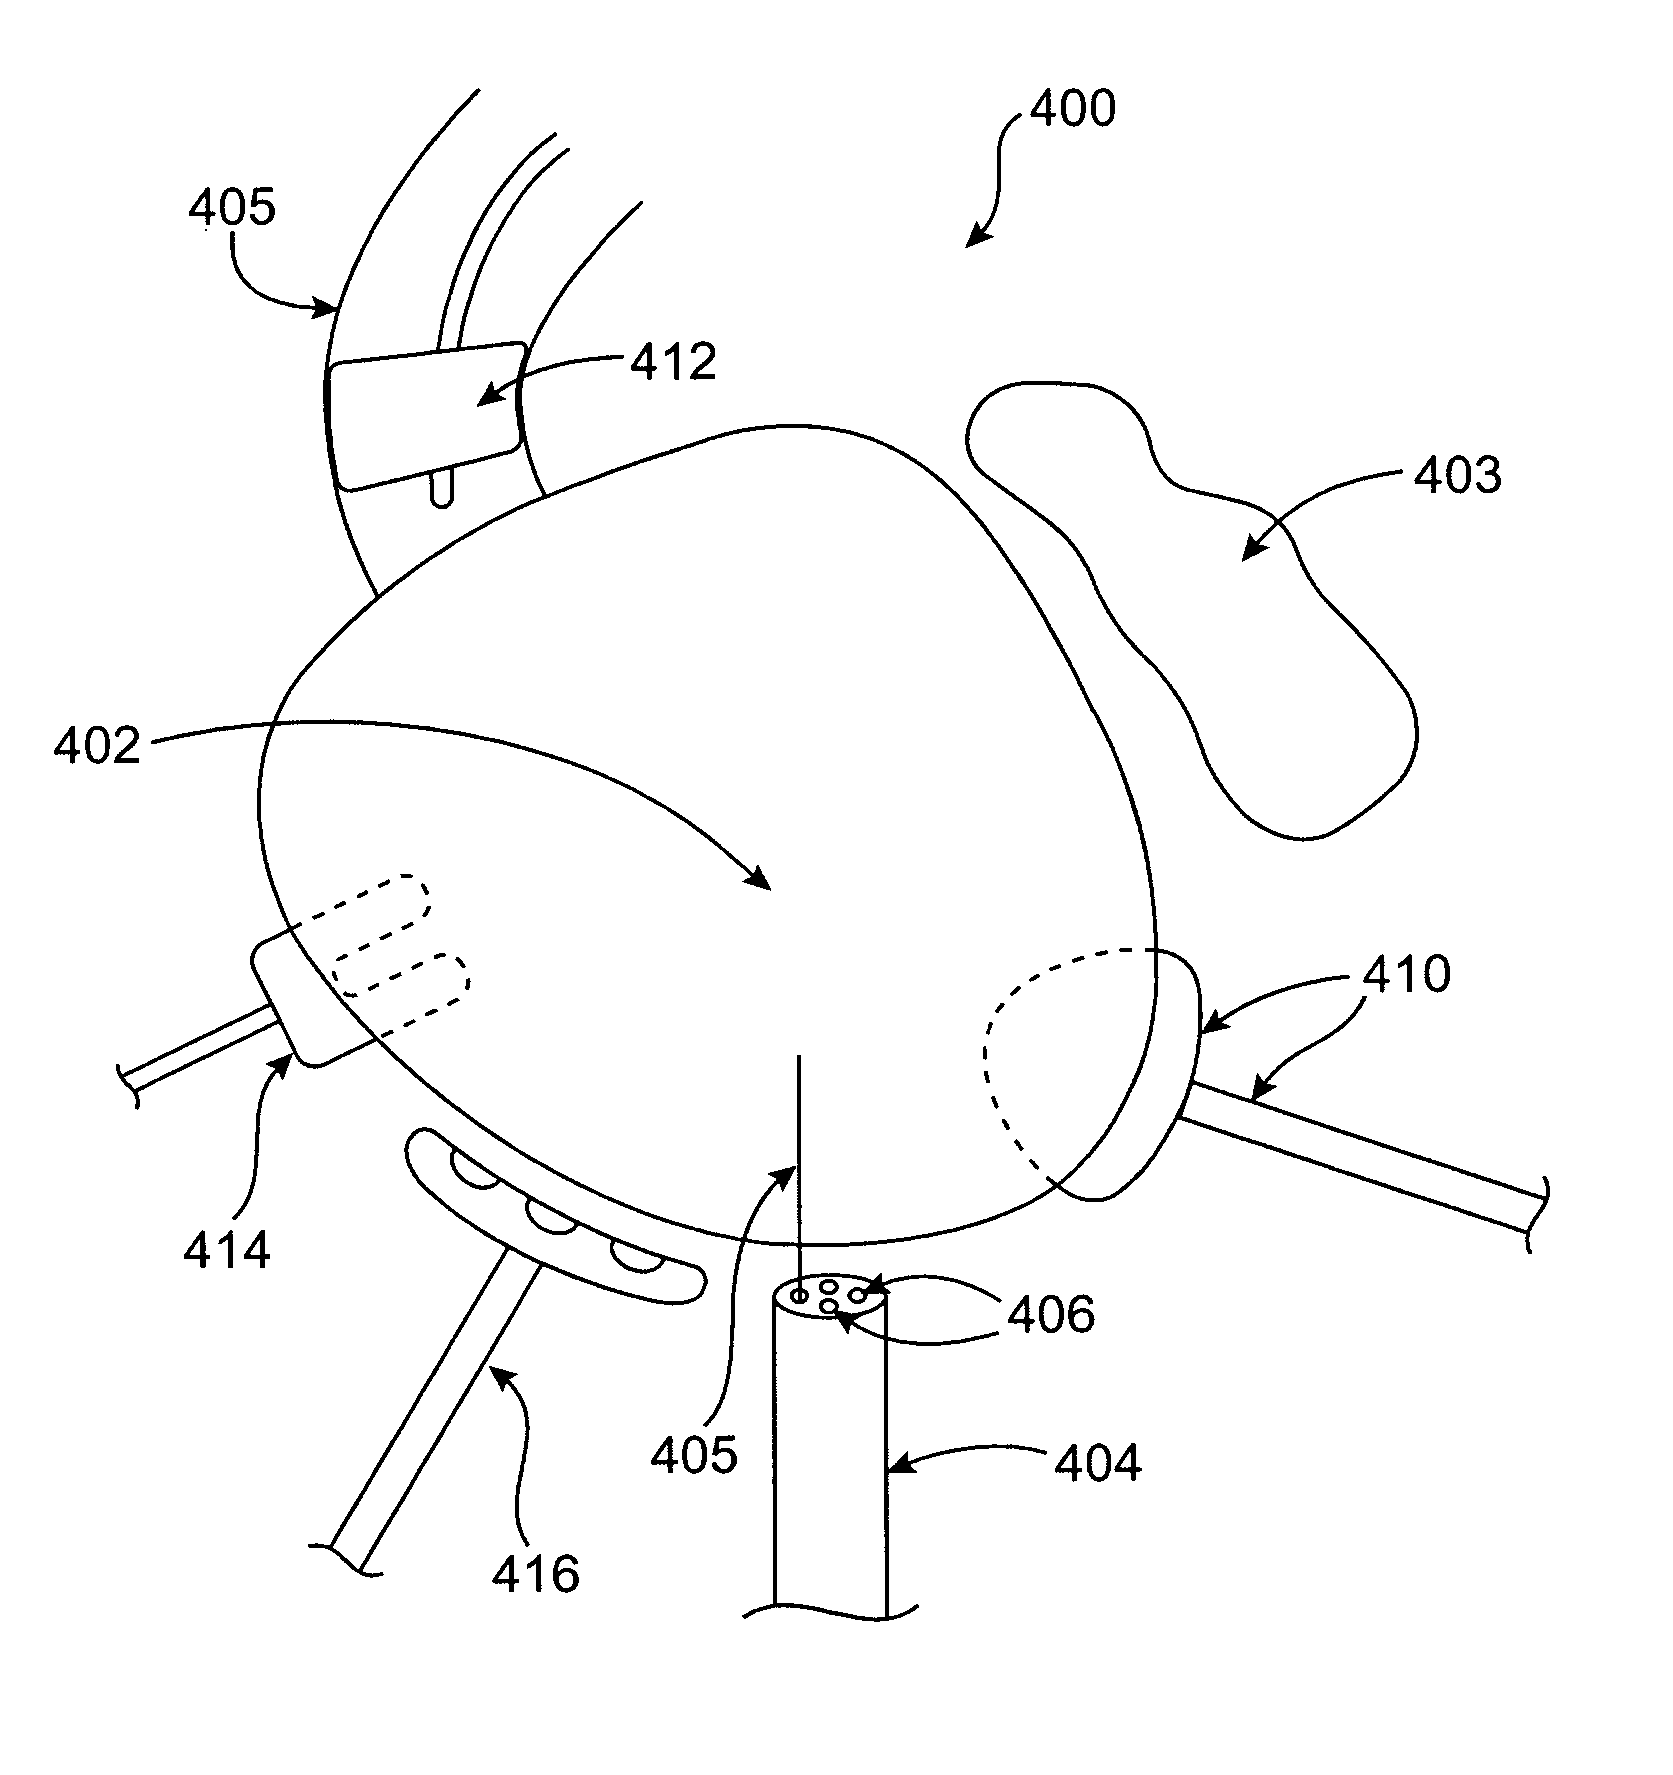 Methods and devices for minimally invasive cardiac surgery for atrial fibrillation